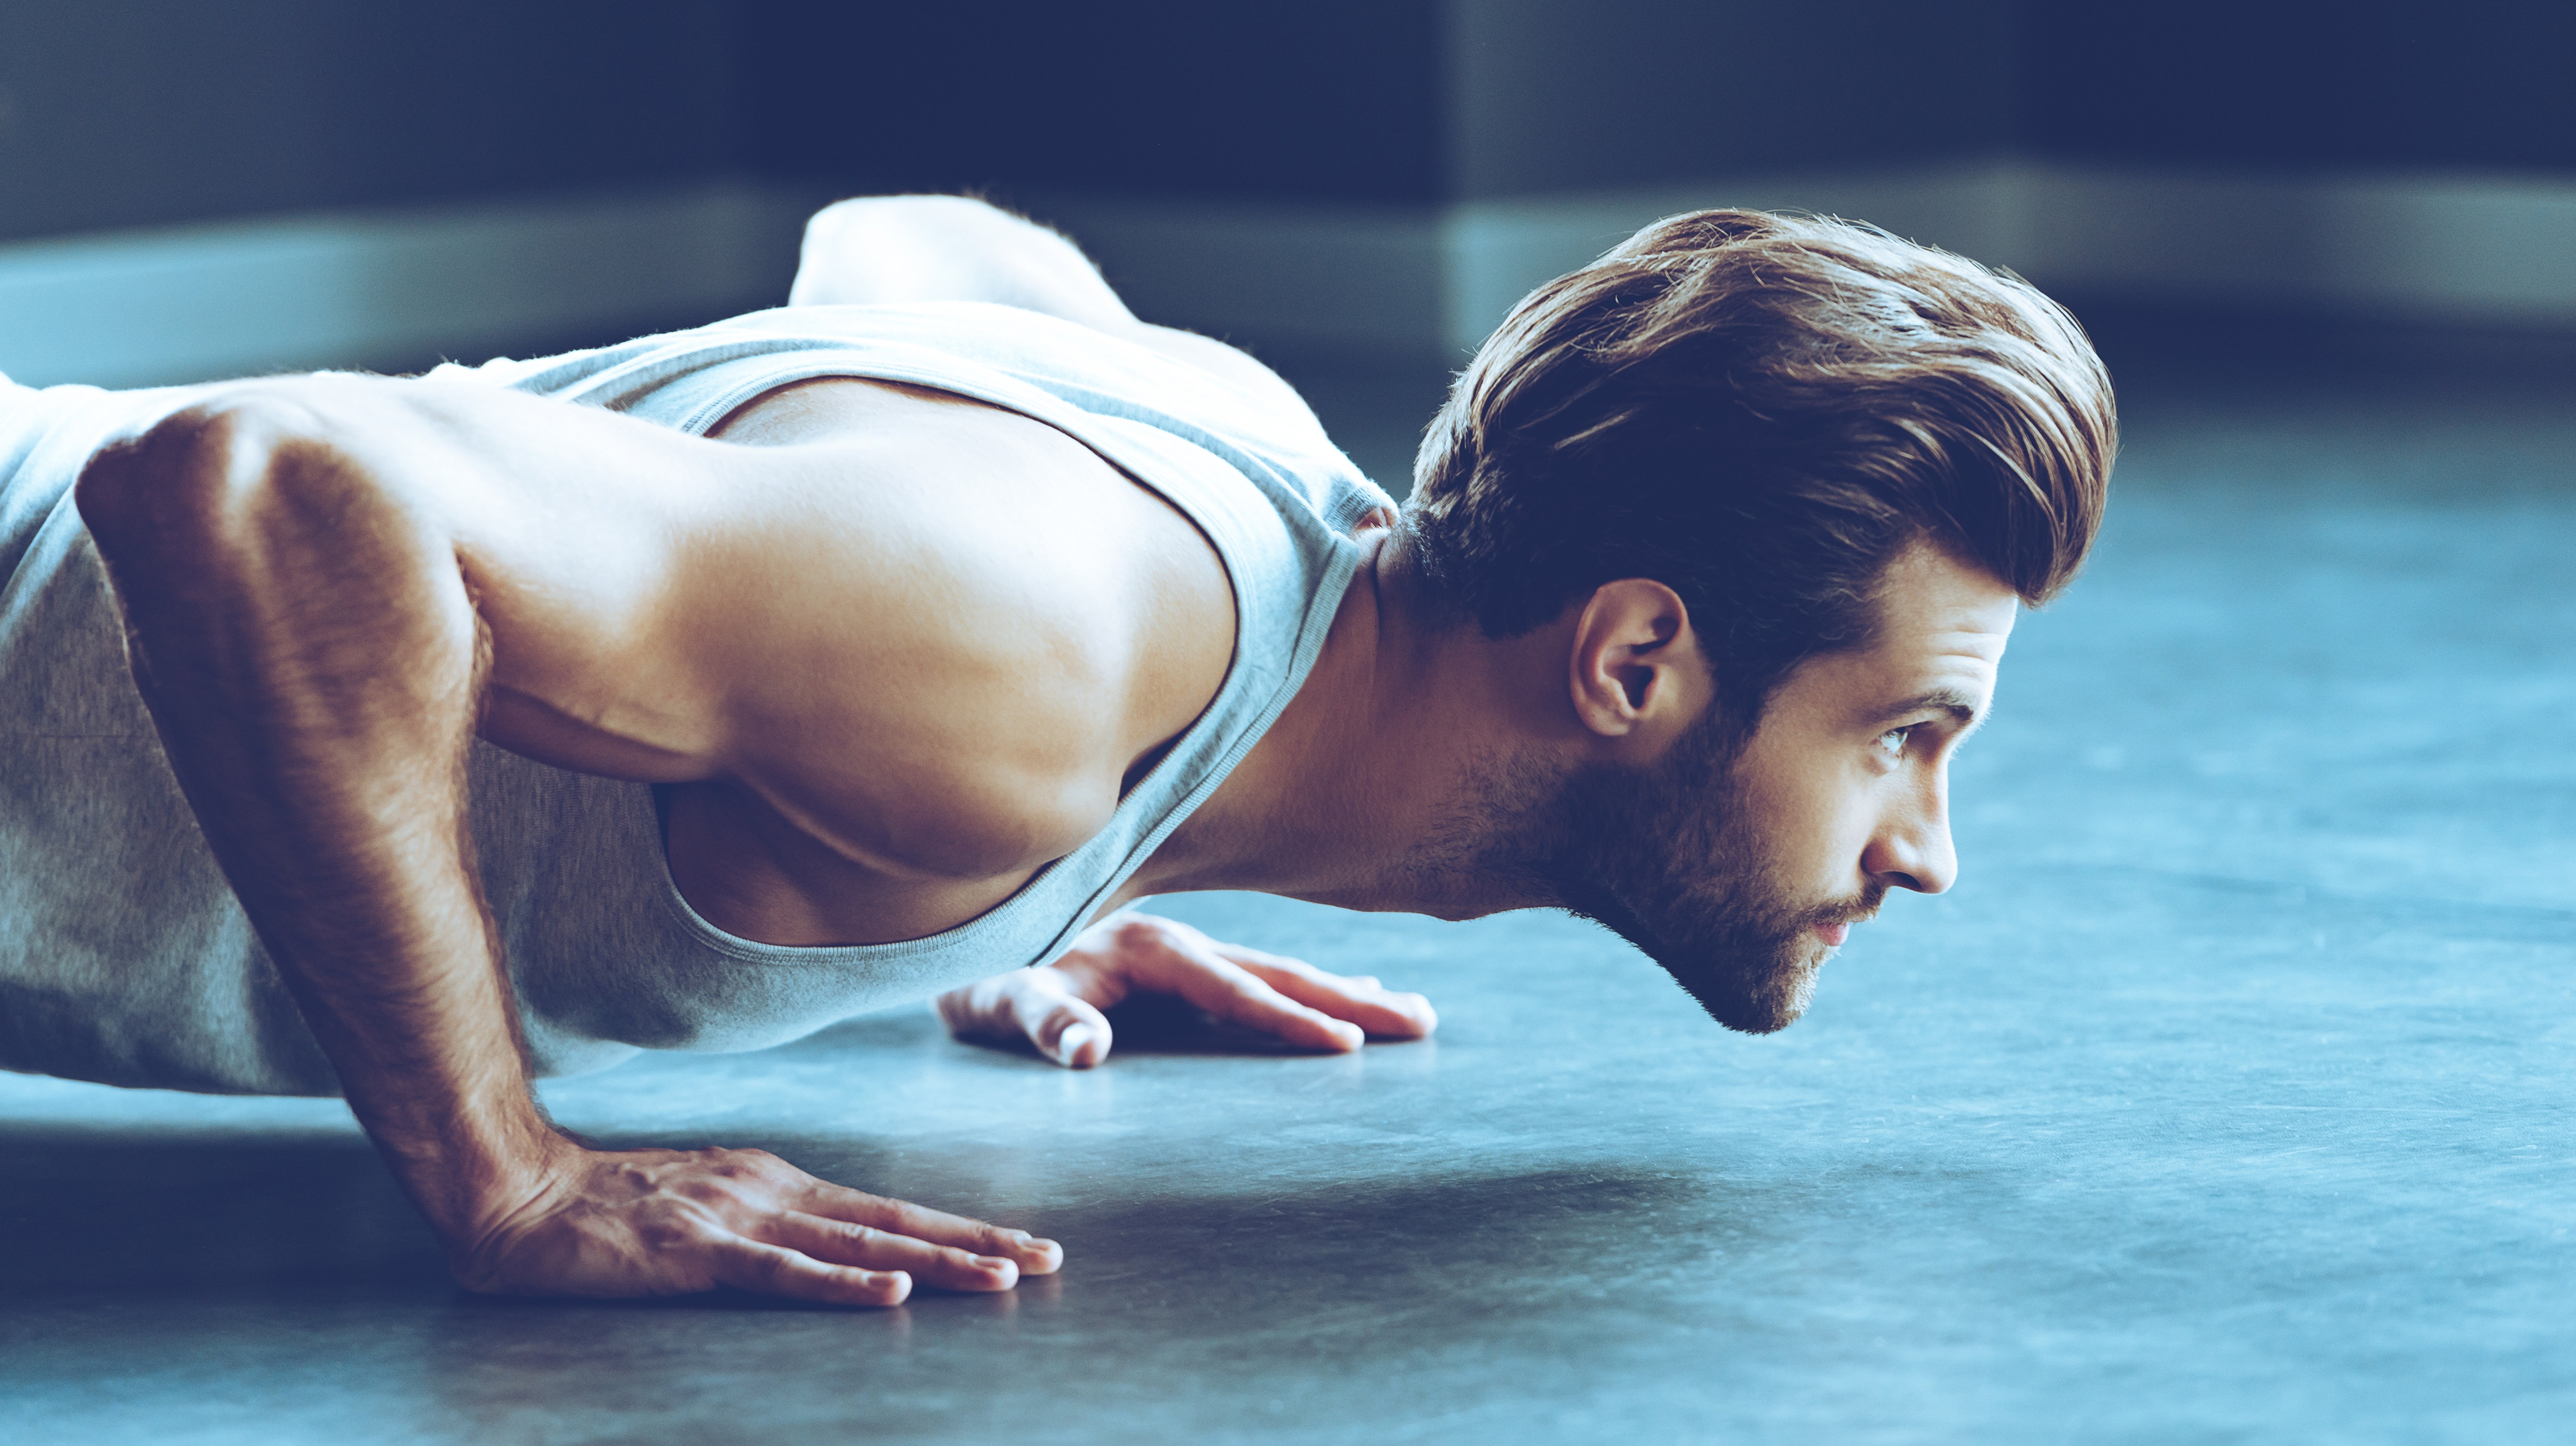 Kick Your Training Up A Notch With These Push-Up Exercises